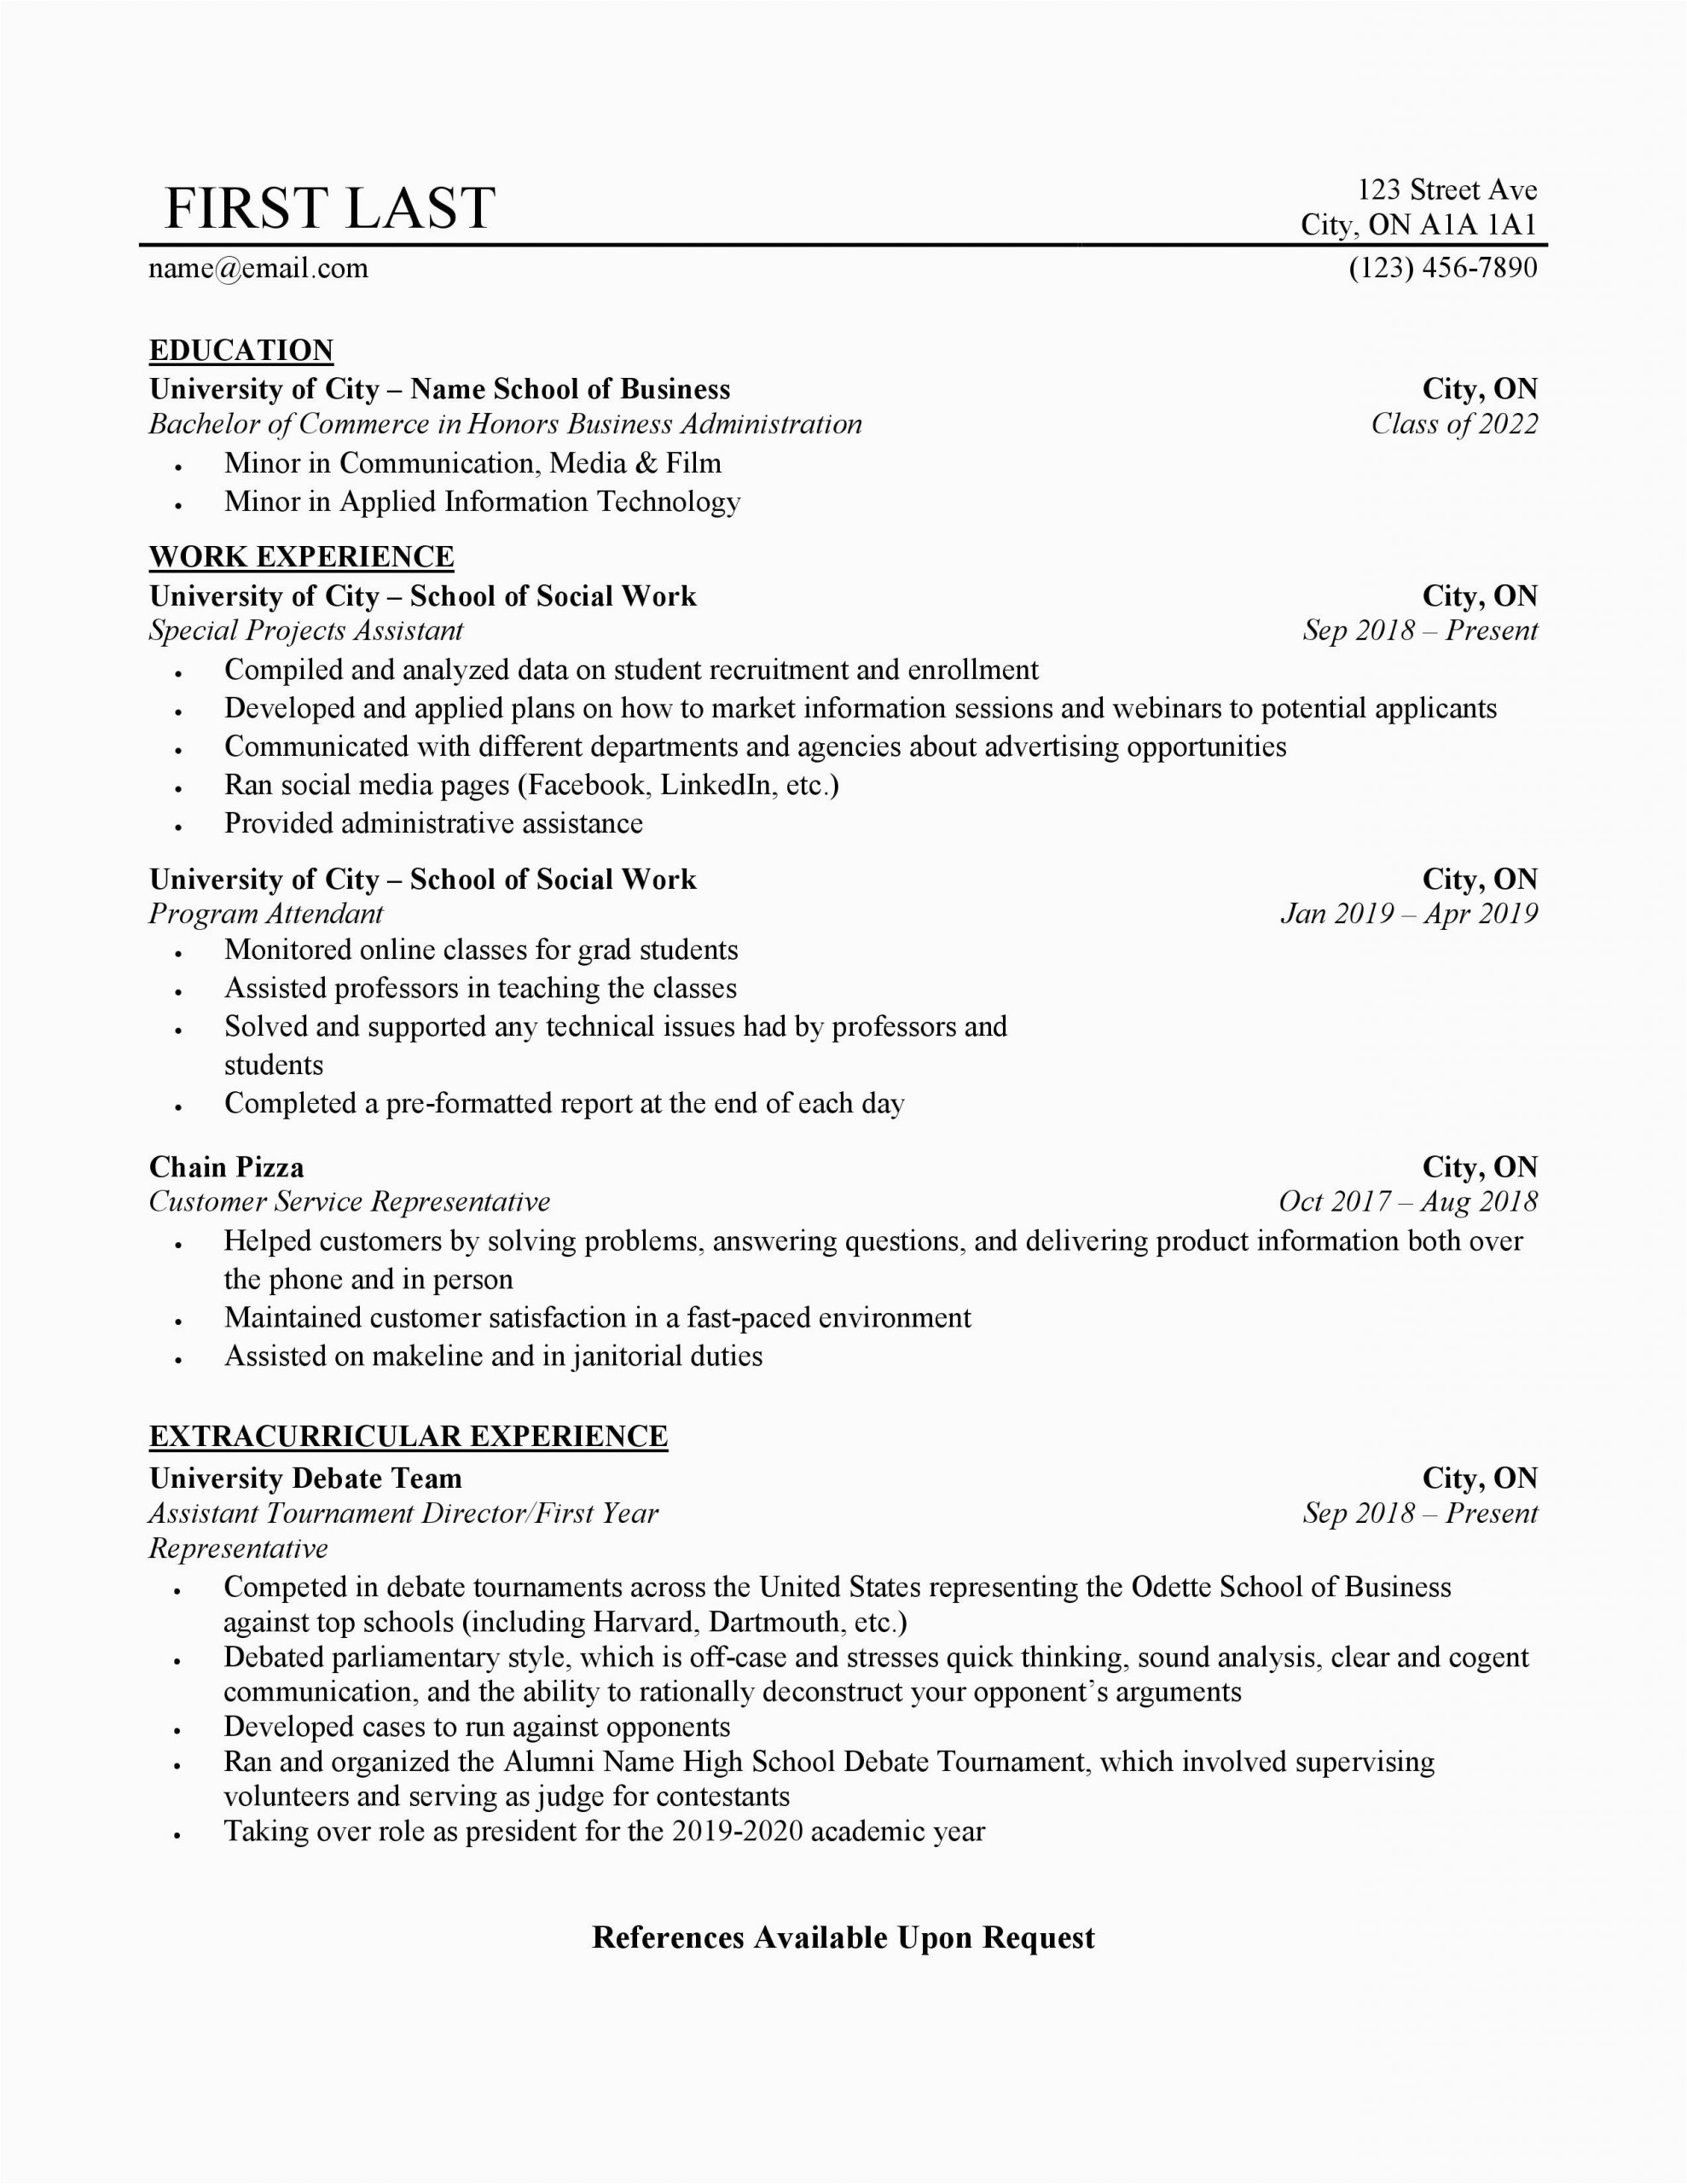 Sample Resume for College Student Looking for Part Time Job College Student Looking for A Part Time Job Any Feedback